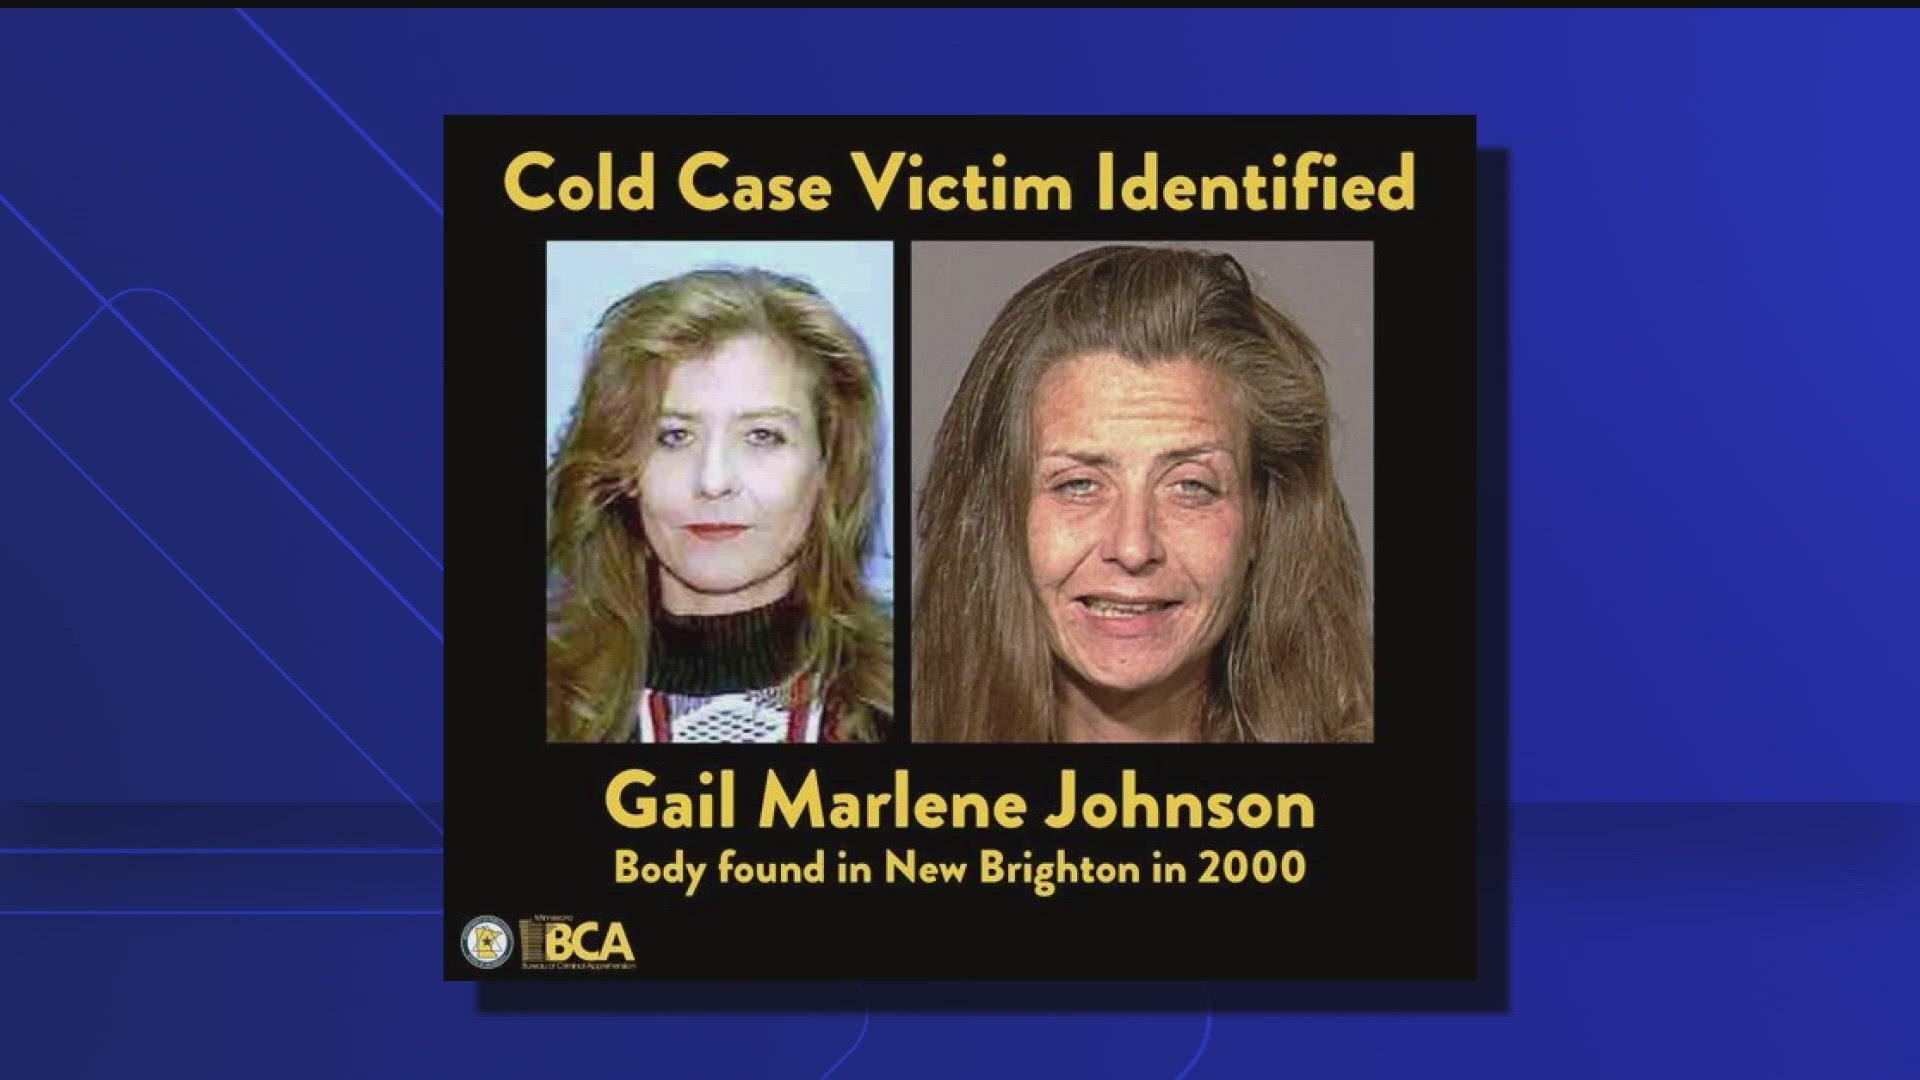 Gail Marlene Johnson was never reported missing, but investigative genetic genealogy connected her DNA to remains found in Long Lake Regional Park in Sep. 2000.